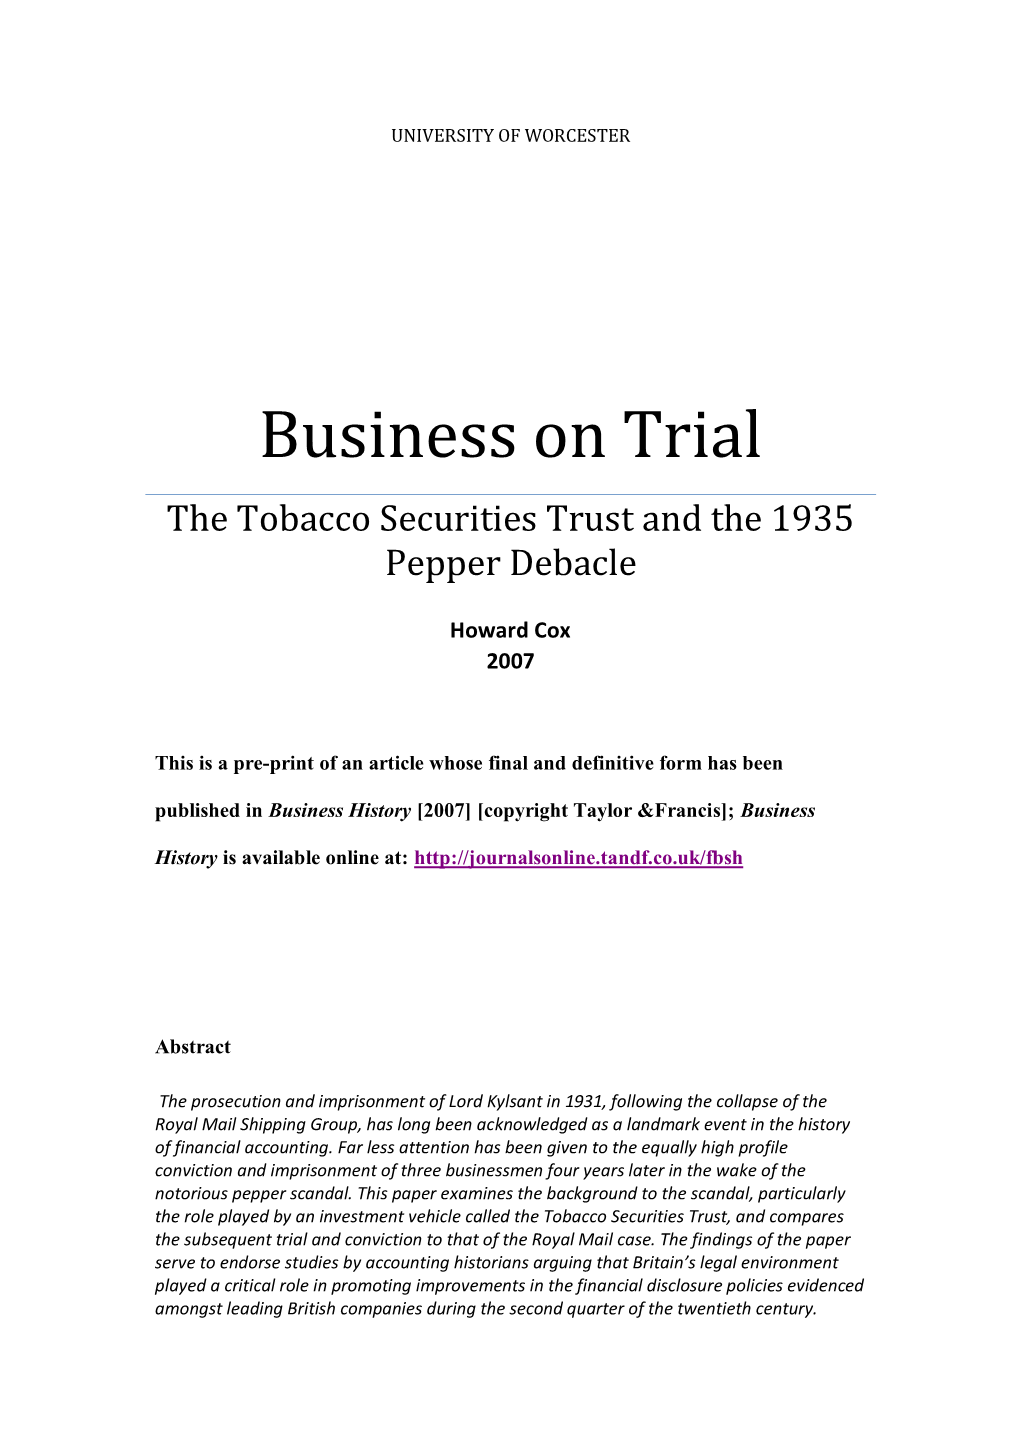 Business on Trial the Tobacco Securities Trust and the 1935 Pepper Debacle